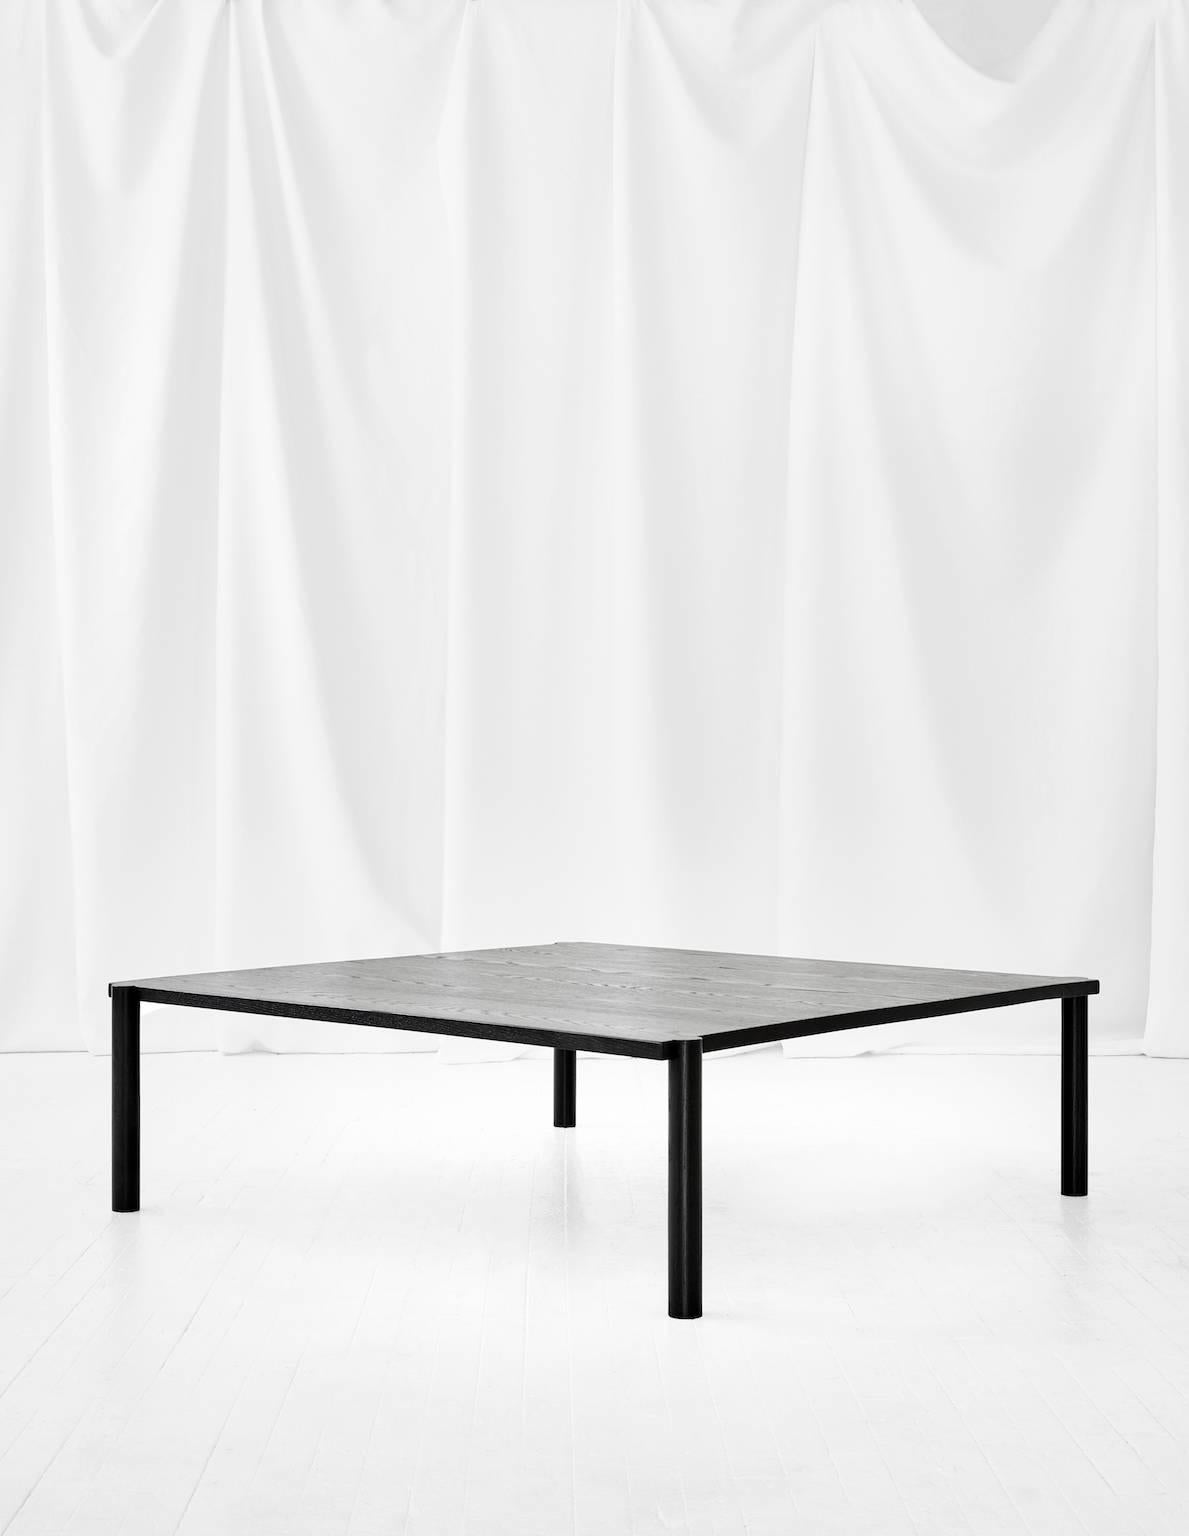 The WC1.1 cocktail table from ASH NYC is the rectilinear version of the WC1 round table. The hand-turned legs join seamlessly with the top to create an elegant, handcrafted joint that defies gravity. 

Taking cues from the famed PK61 cocktail